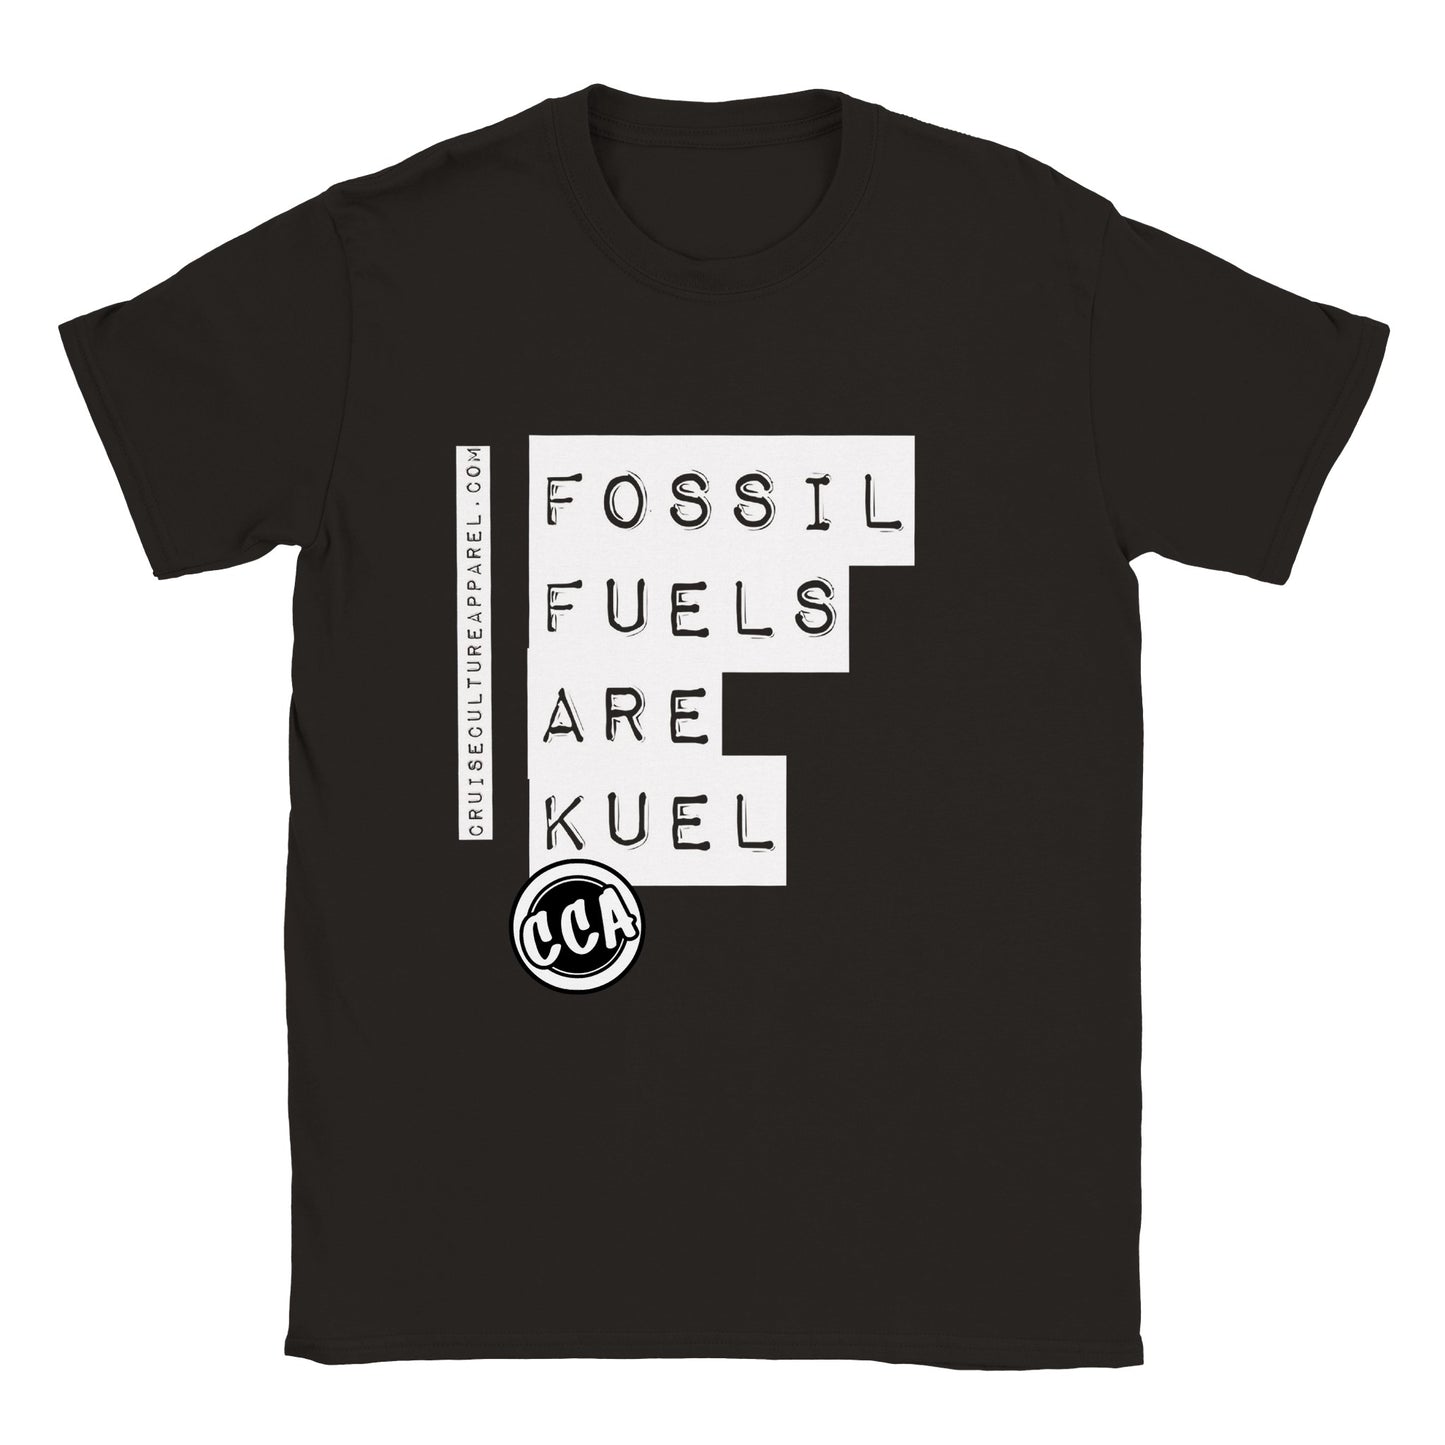 Fossil Fuels are Kuel